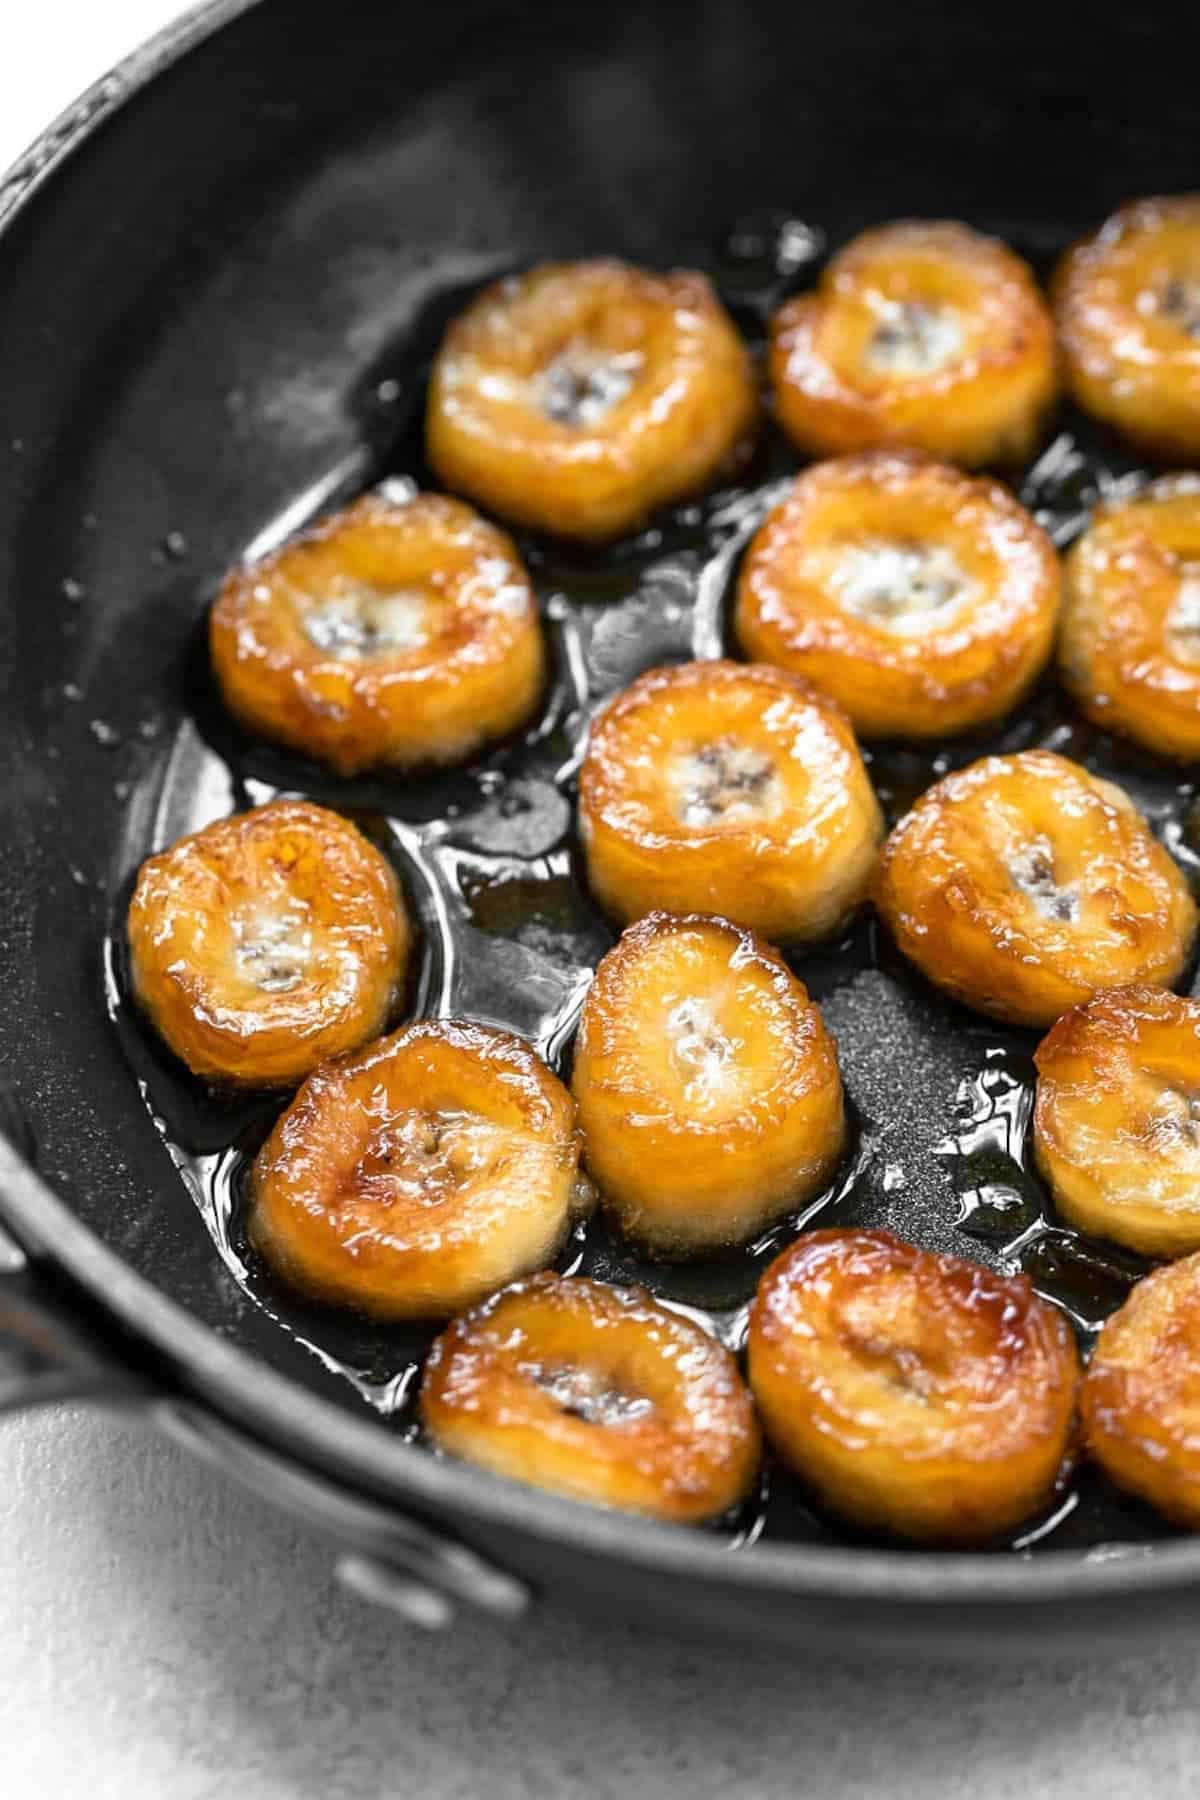 Caramelized bananas in a black pan.